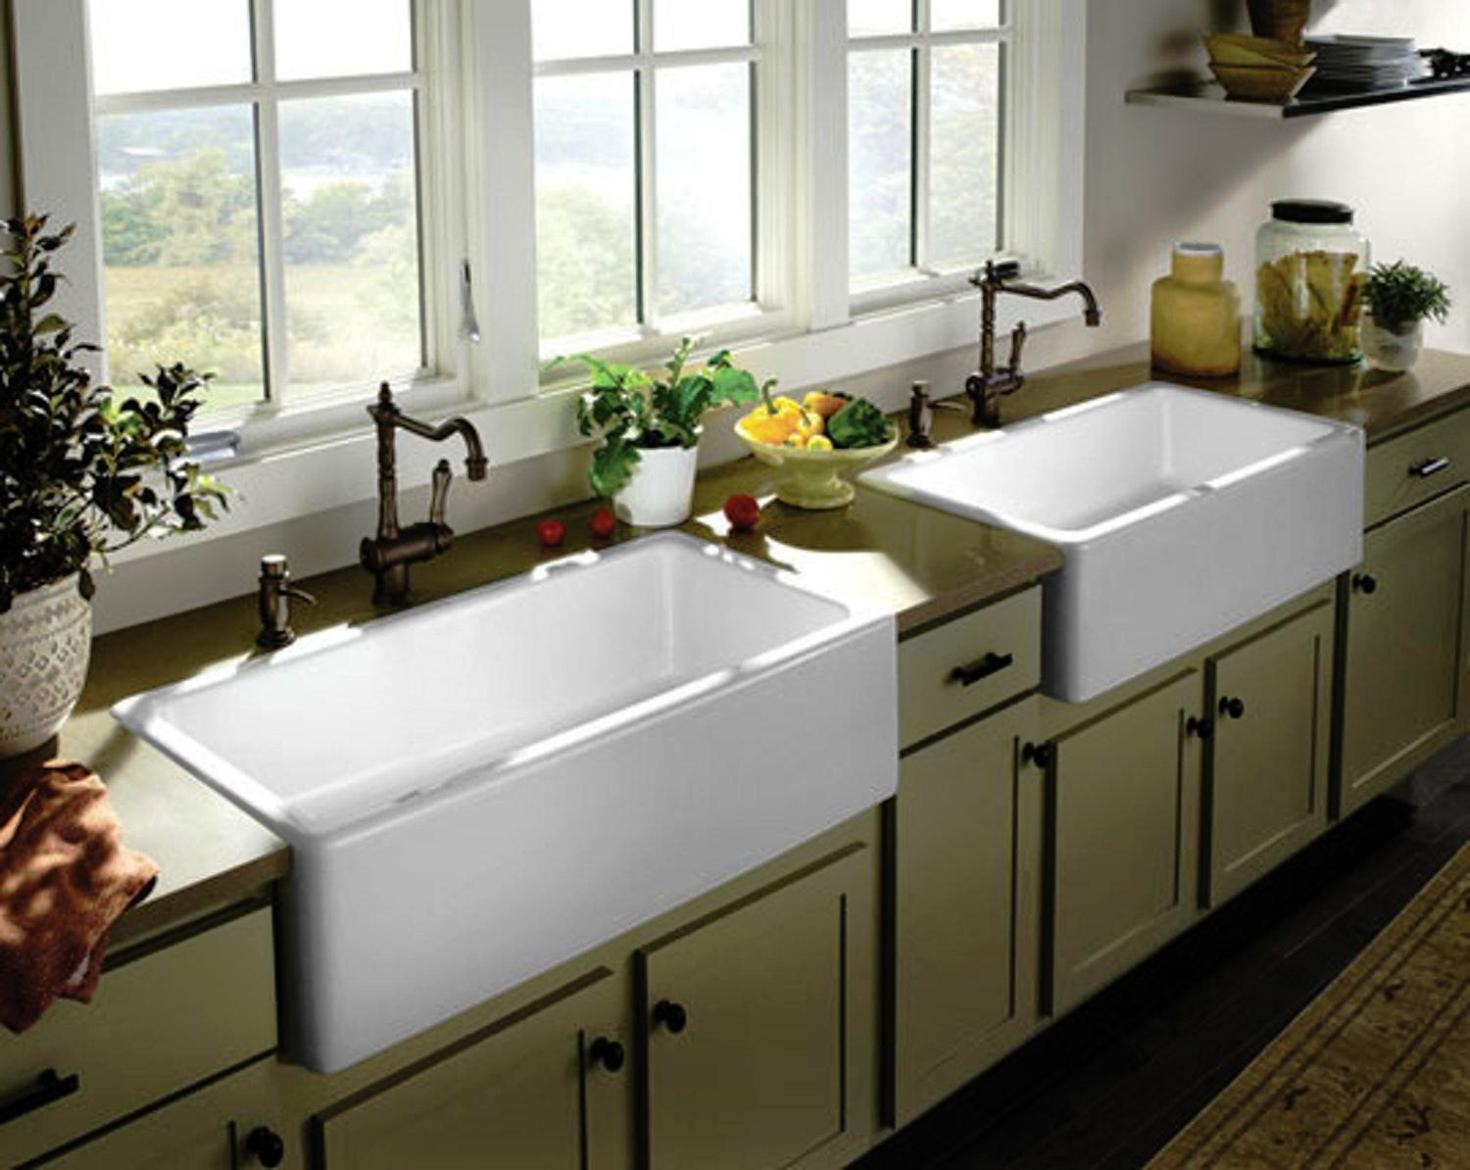 2 farmhouse sink side by side and kitchen